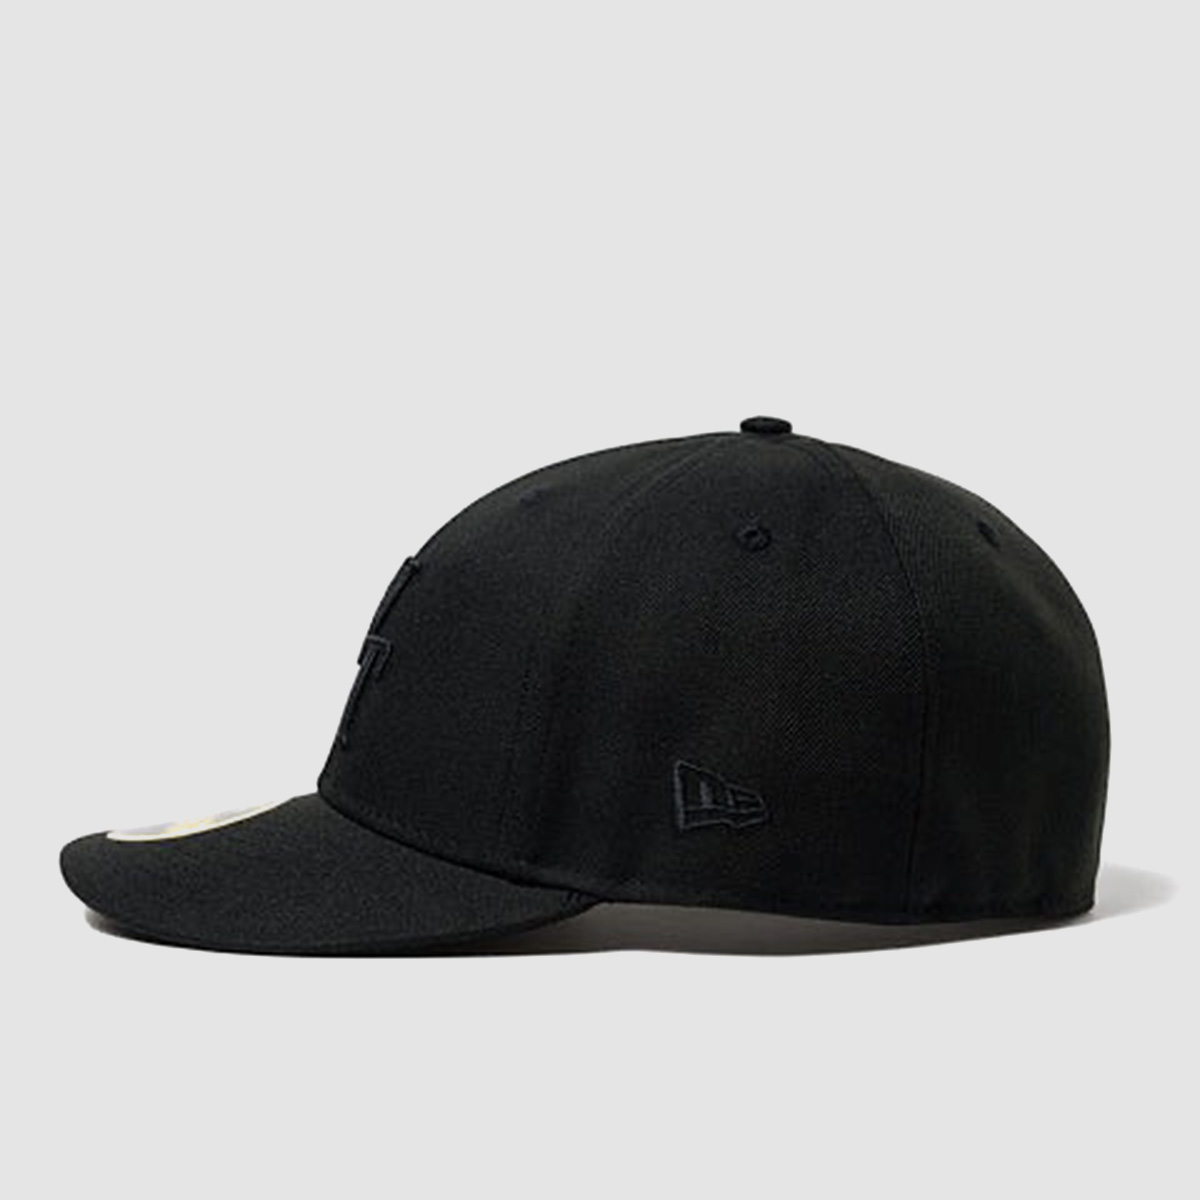 INVINCIBLE - 59FIFTY LOW PROFILE / CAP / POLY. TWILL. NEWERA®. LEAGUE